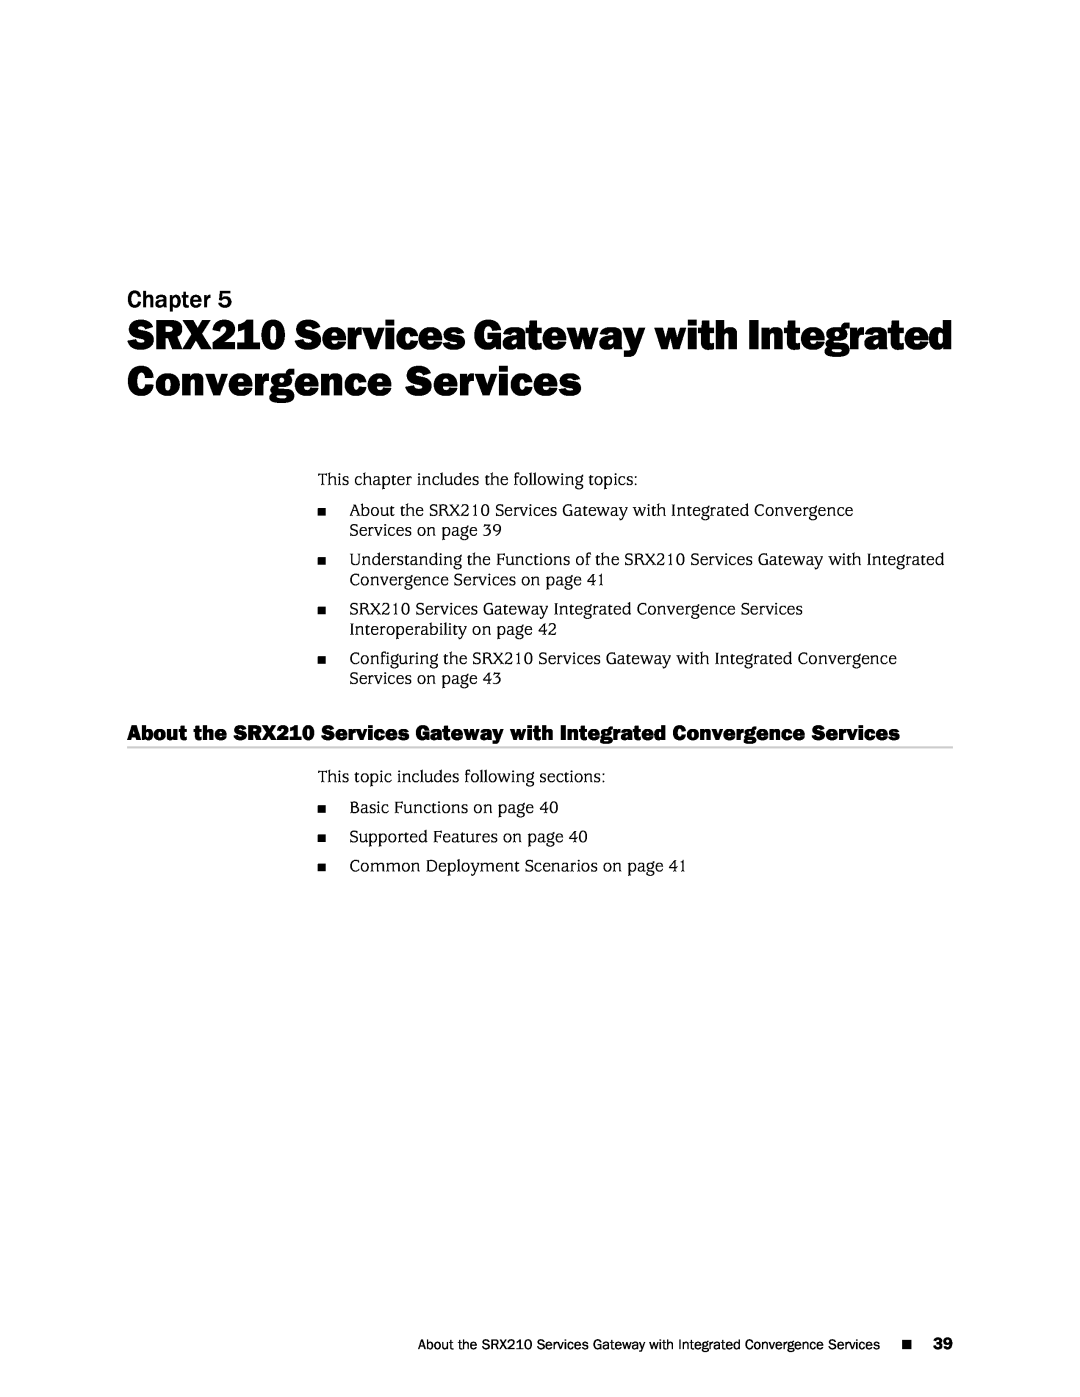 Juniper Networks SRX 210 manual SRX210 Services Gateway with Integrated Convergence Services, Chapter 